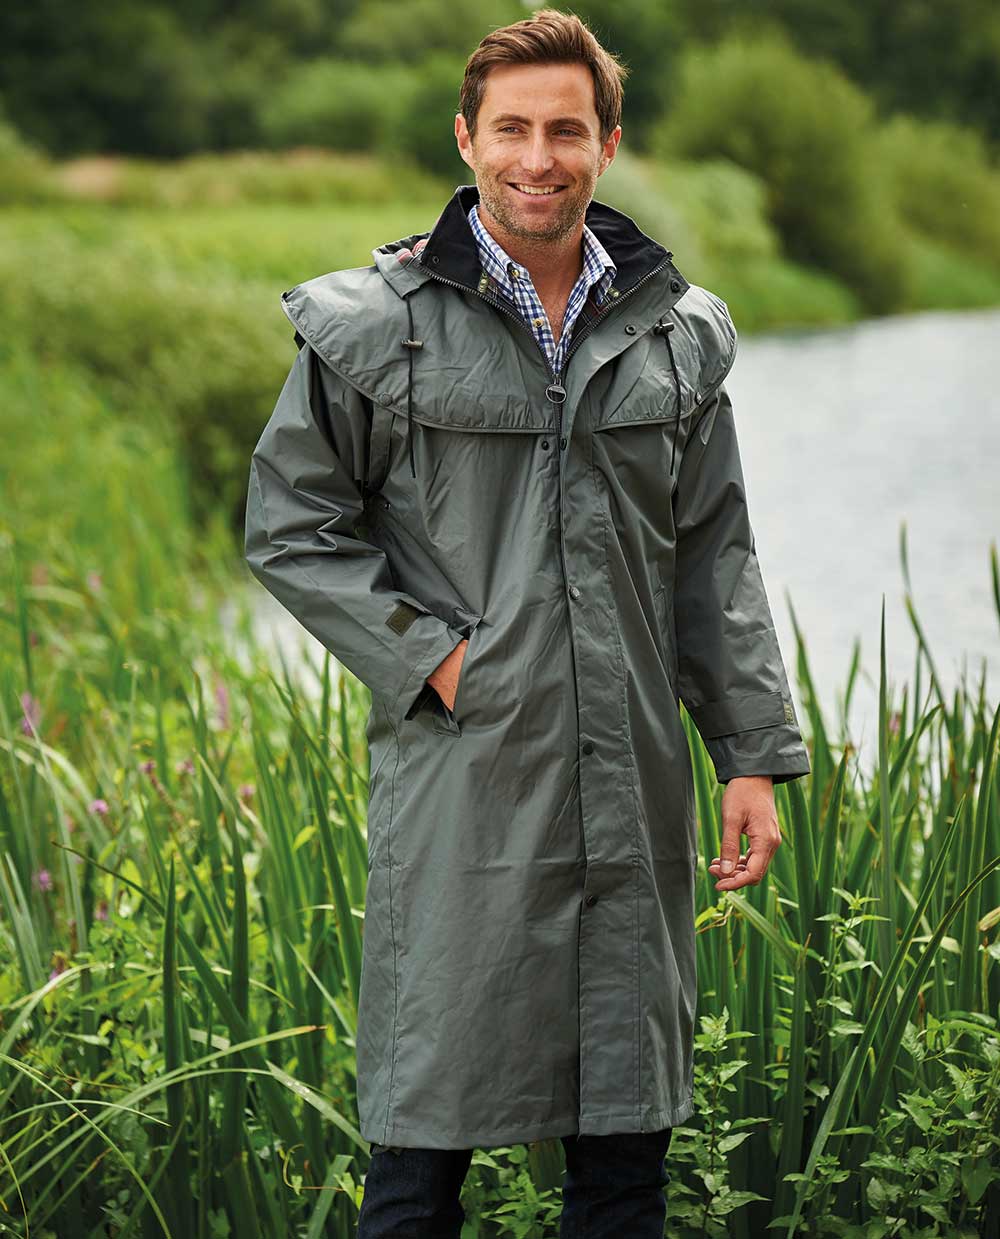 waterproof suit, 4 Sailing & Fishing Ads For Sale in Ireland